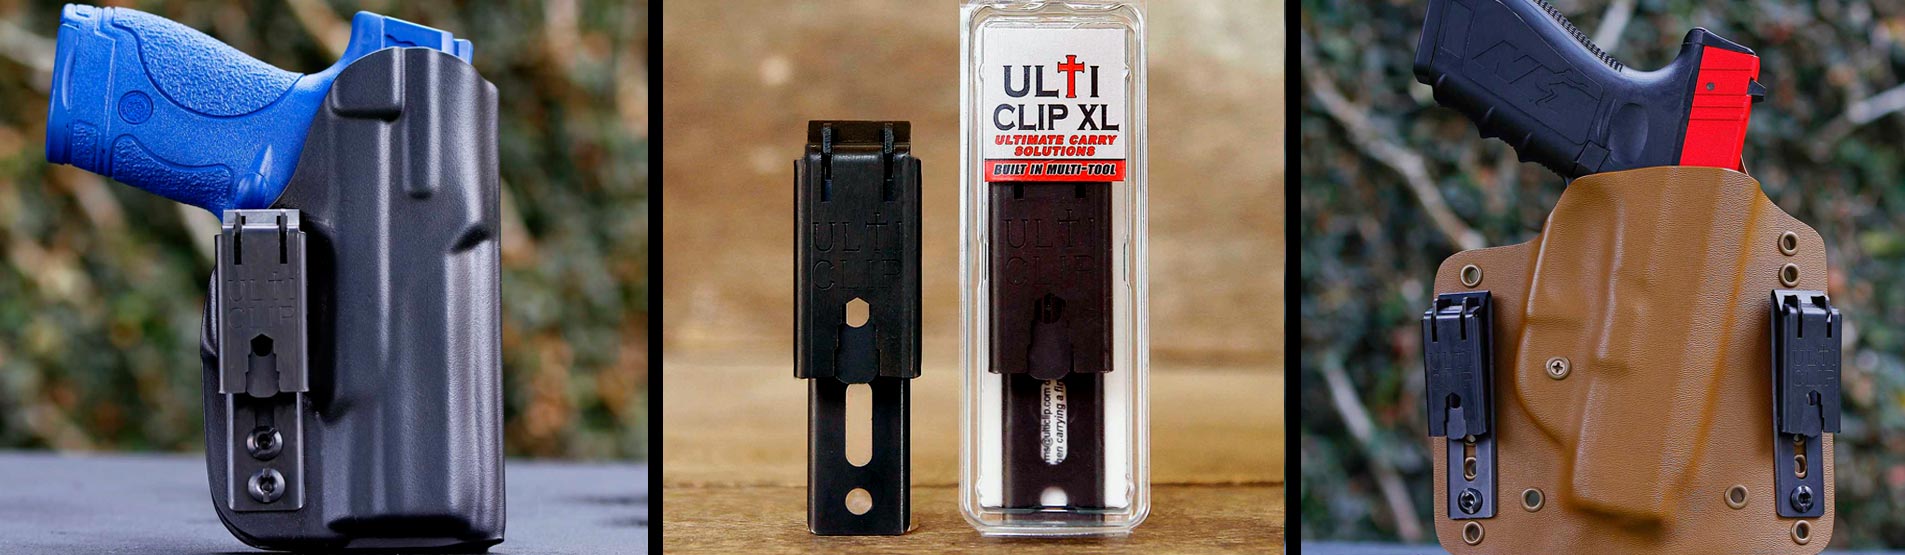  Ulticlip XL : Sports & Outdoors